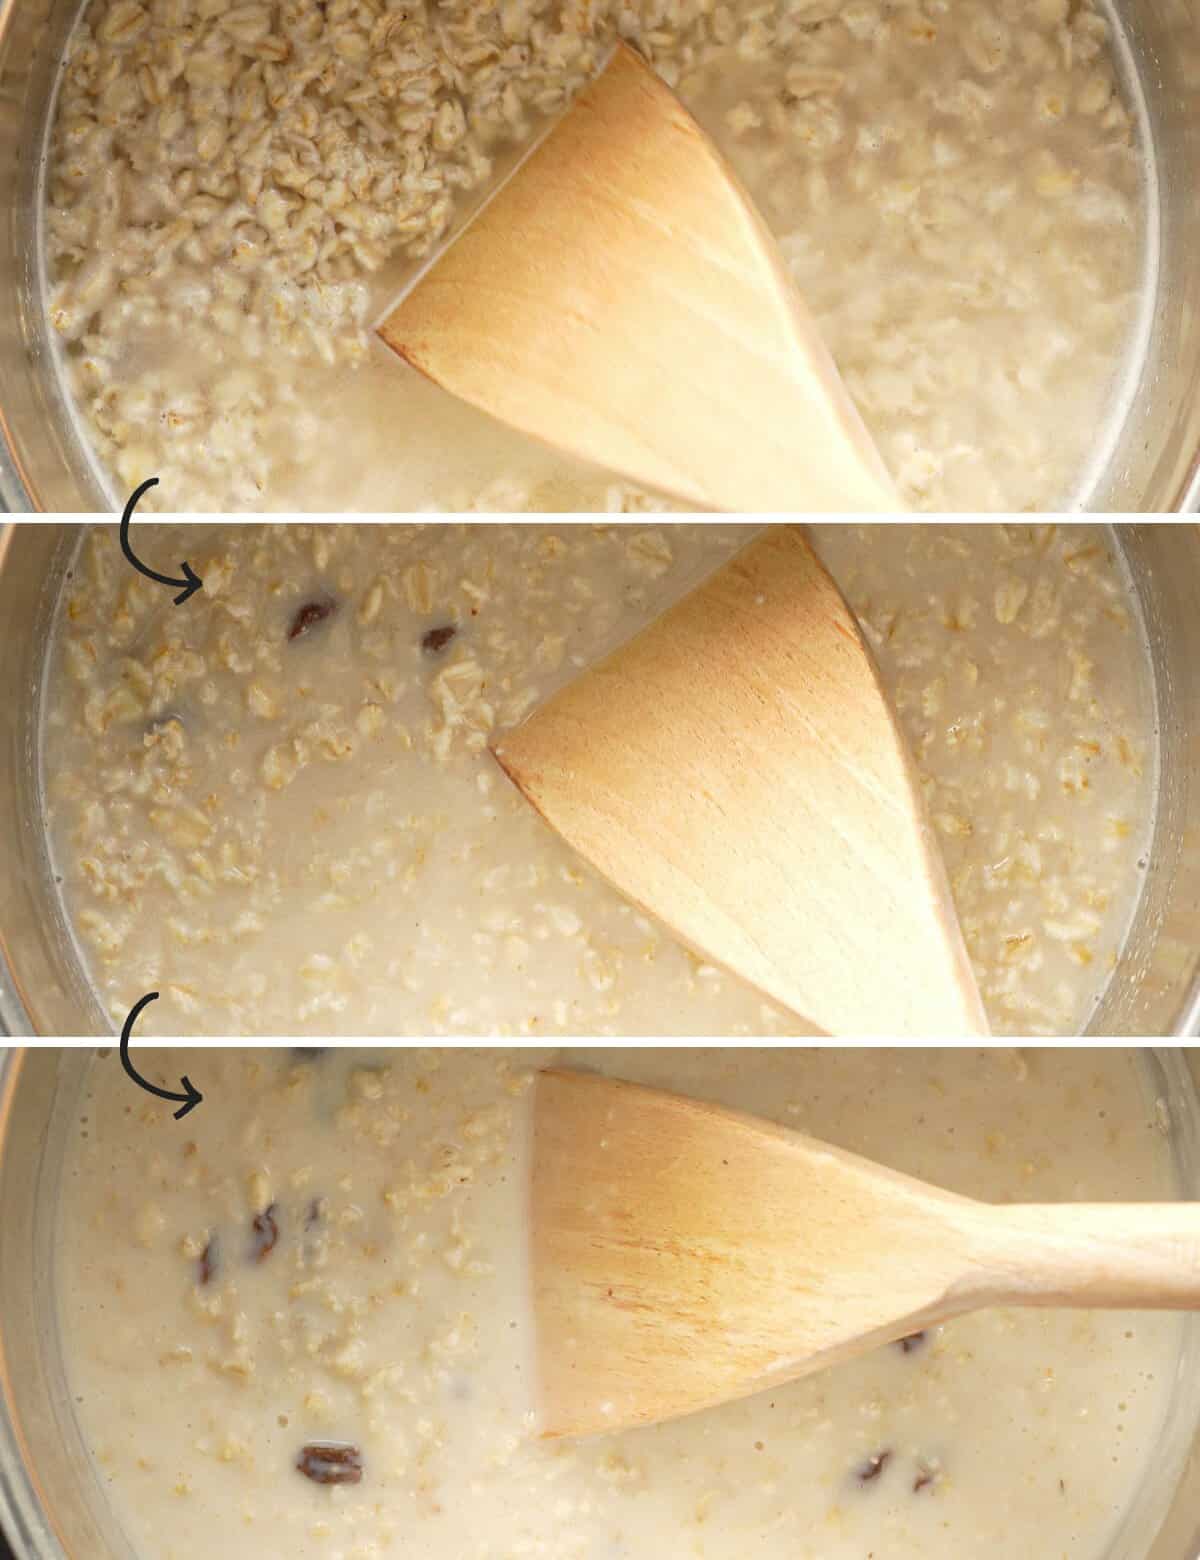 A three photo collage of oatmeal, showing the stages of starch release from the rolled oats. 